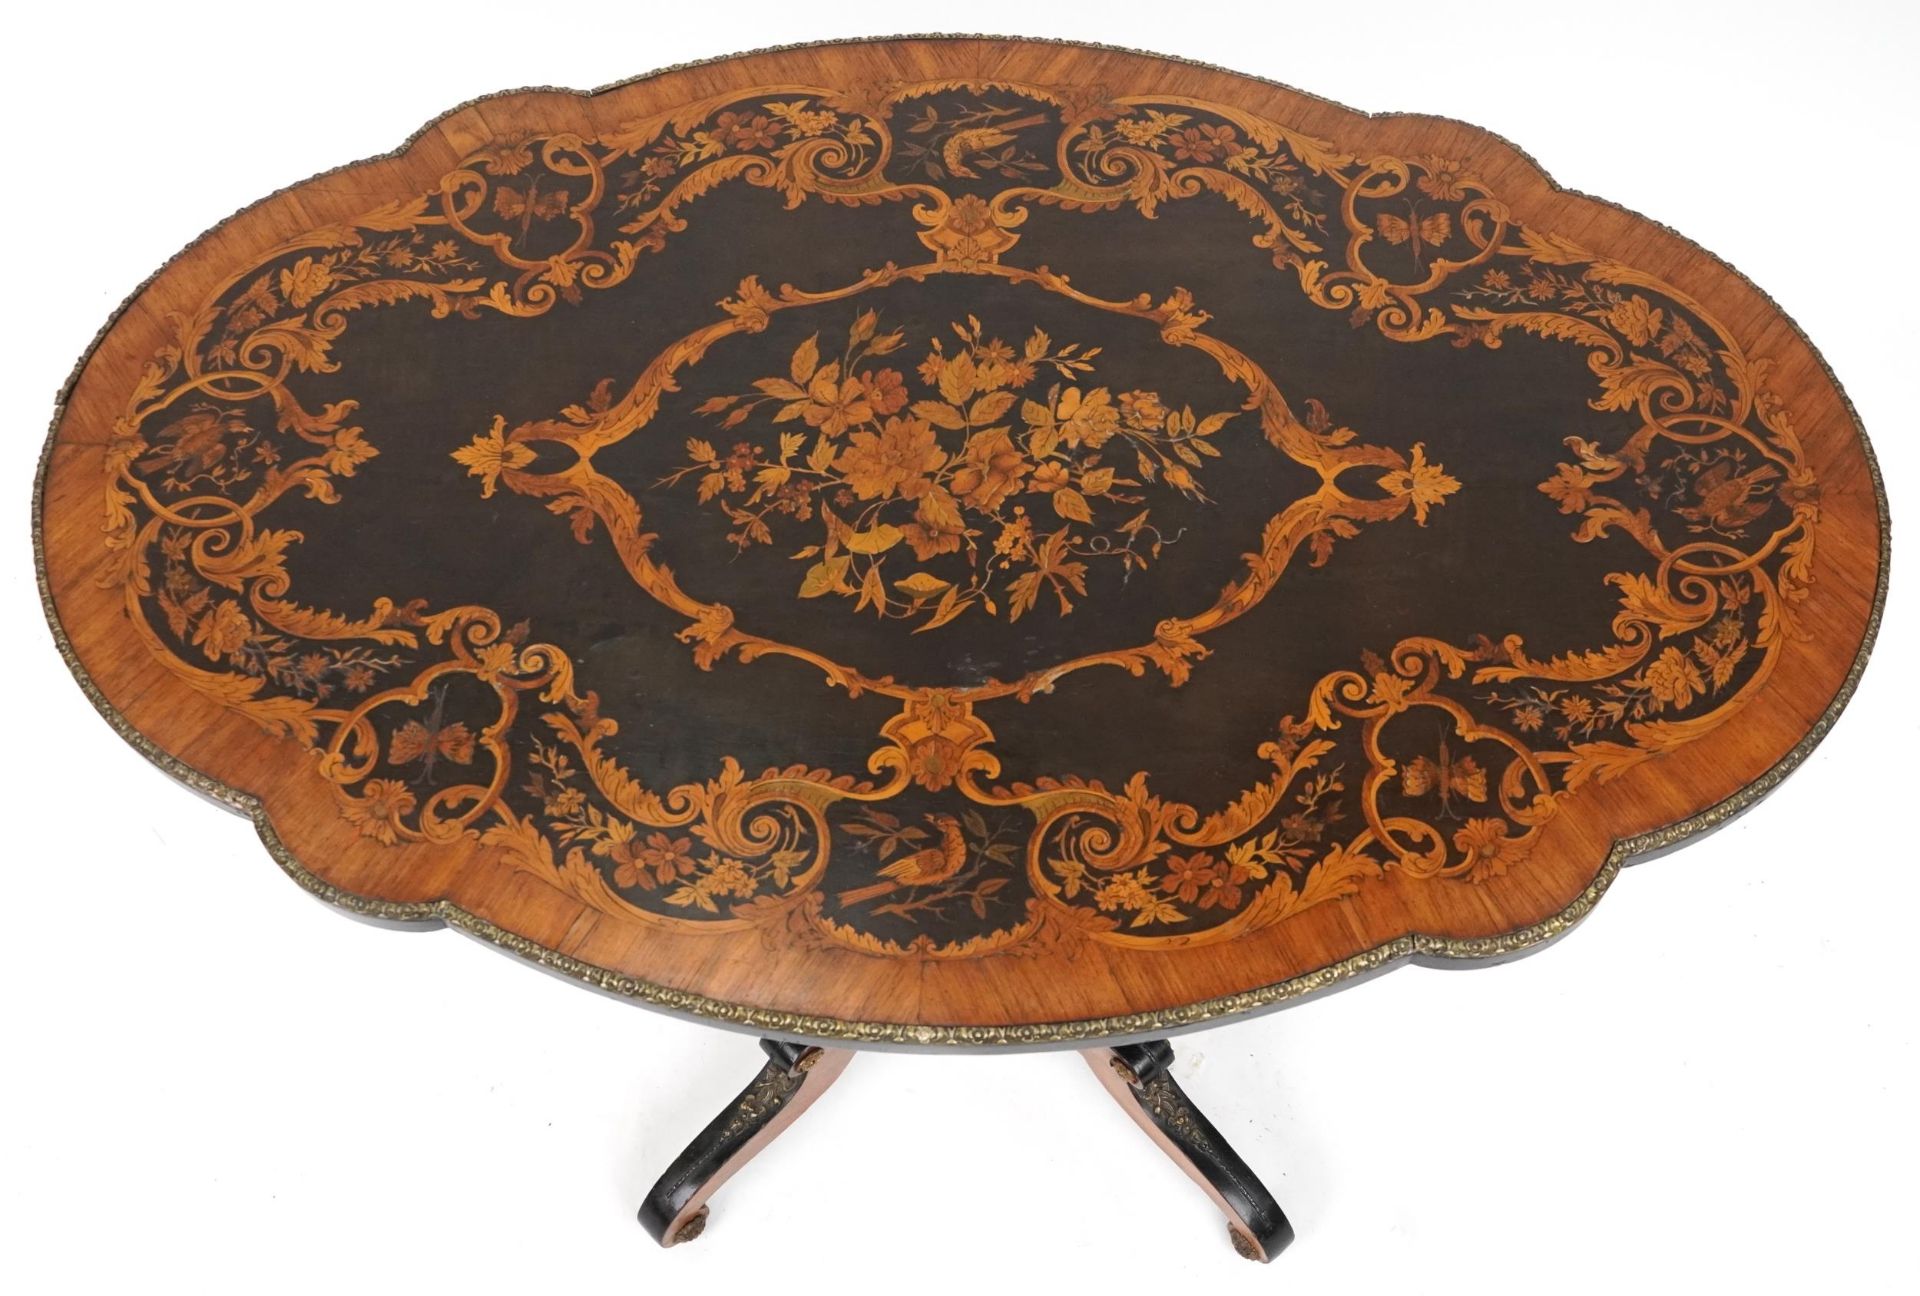 19th century continental kingwood, ebony and marquetry inlaid tilt top centre table with shaped - Image 5 of 9